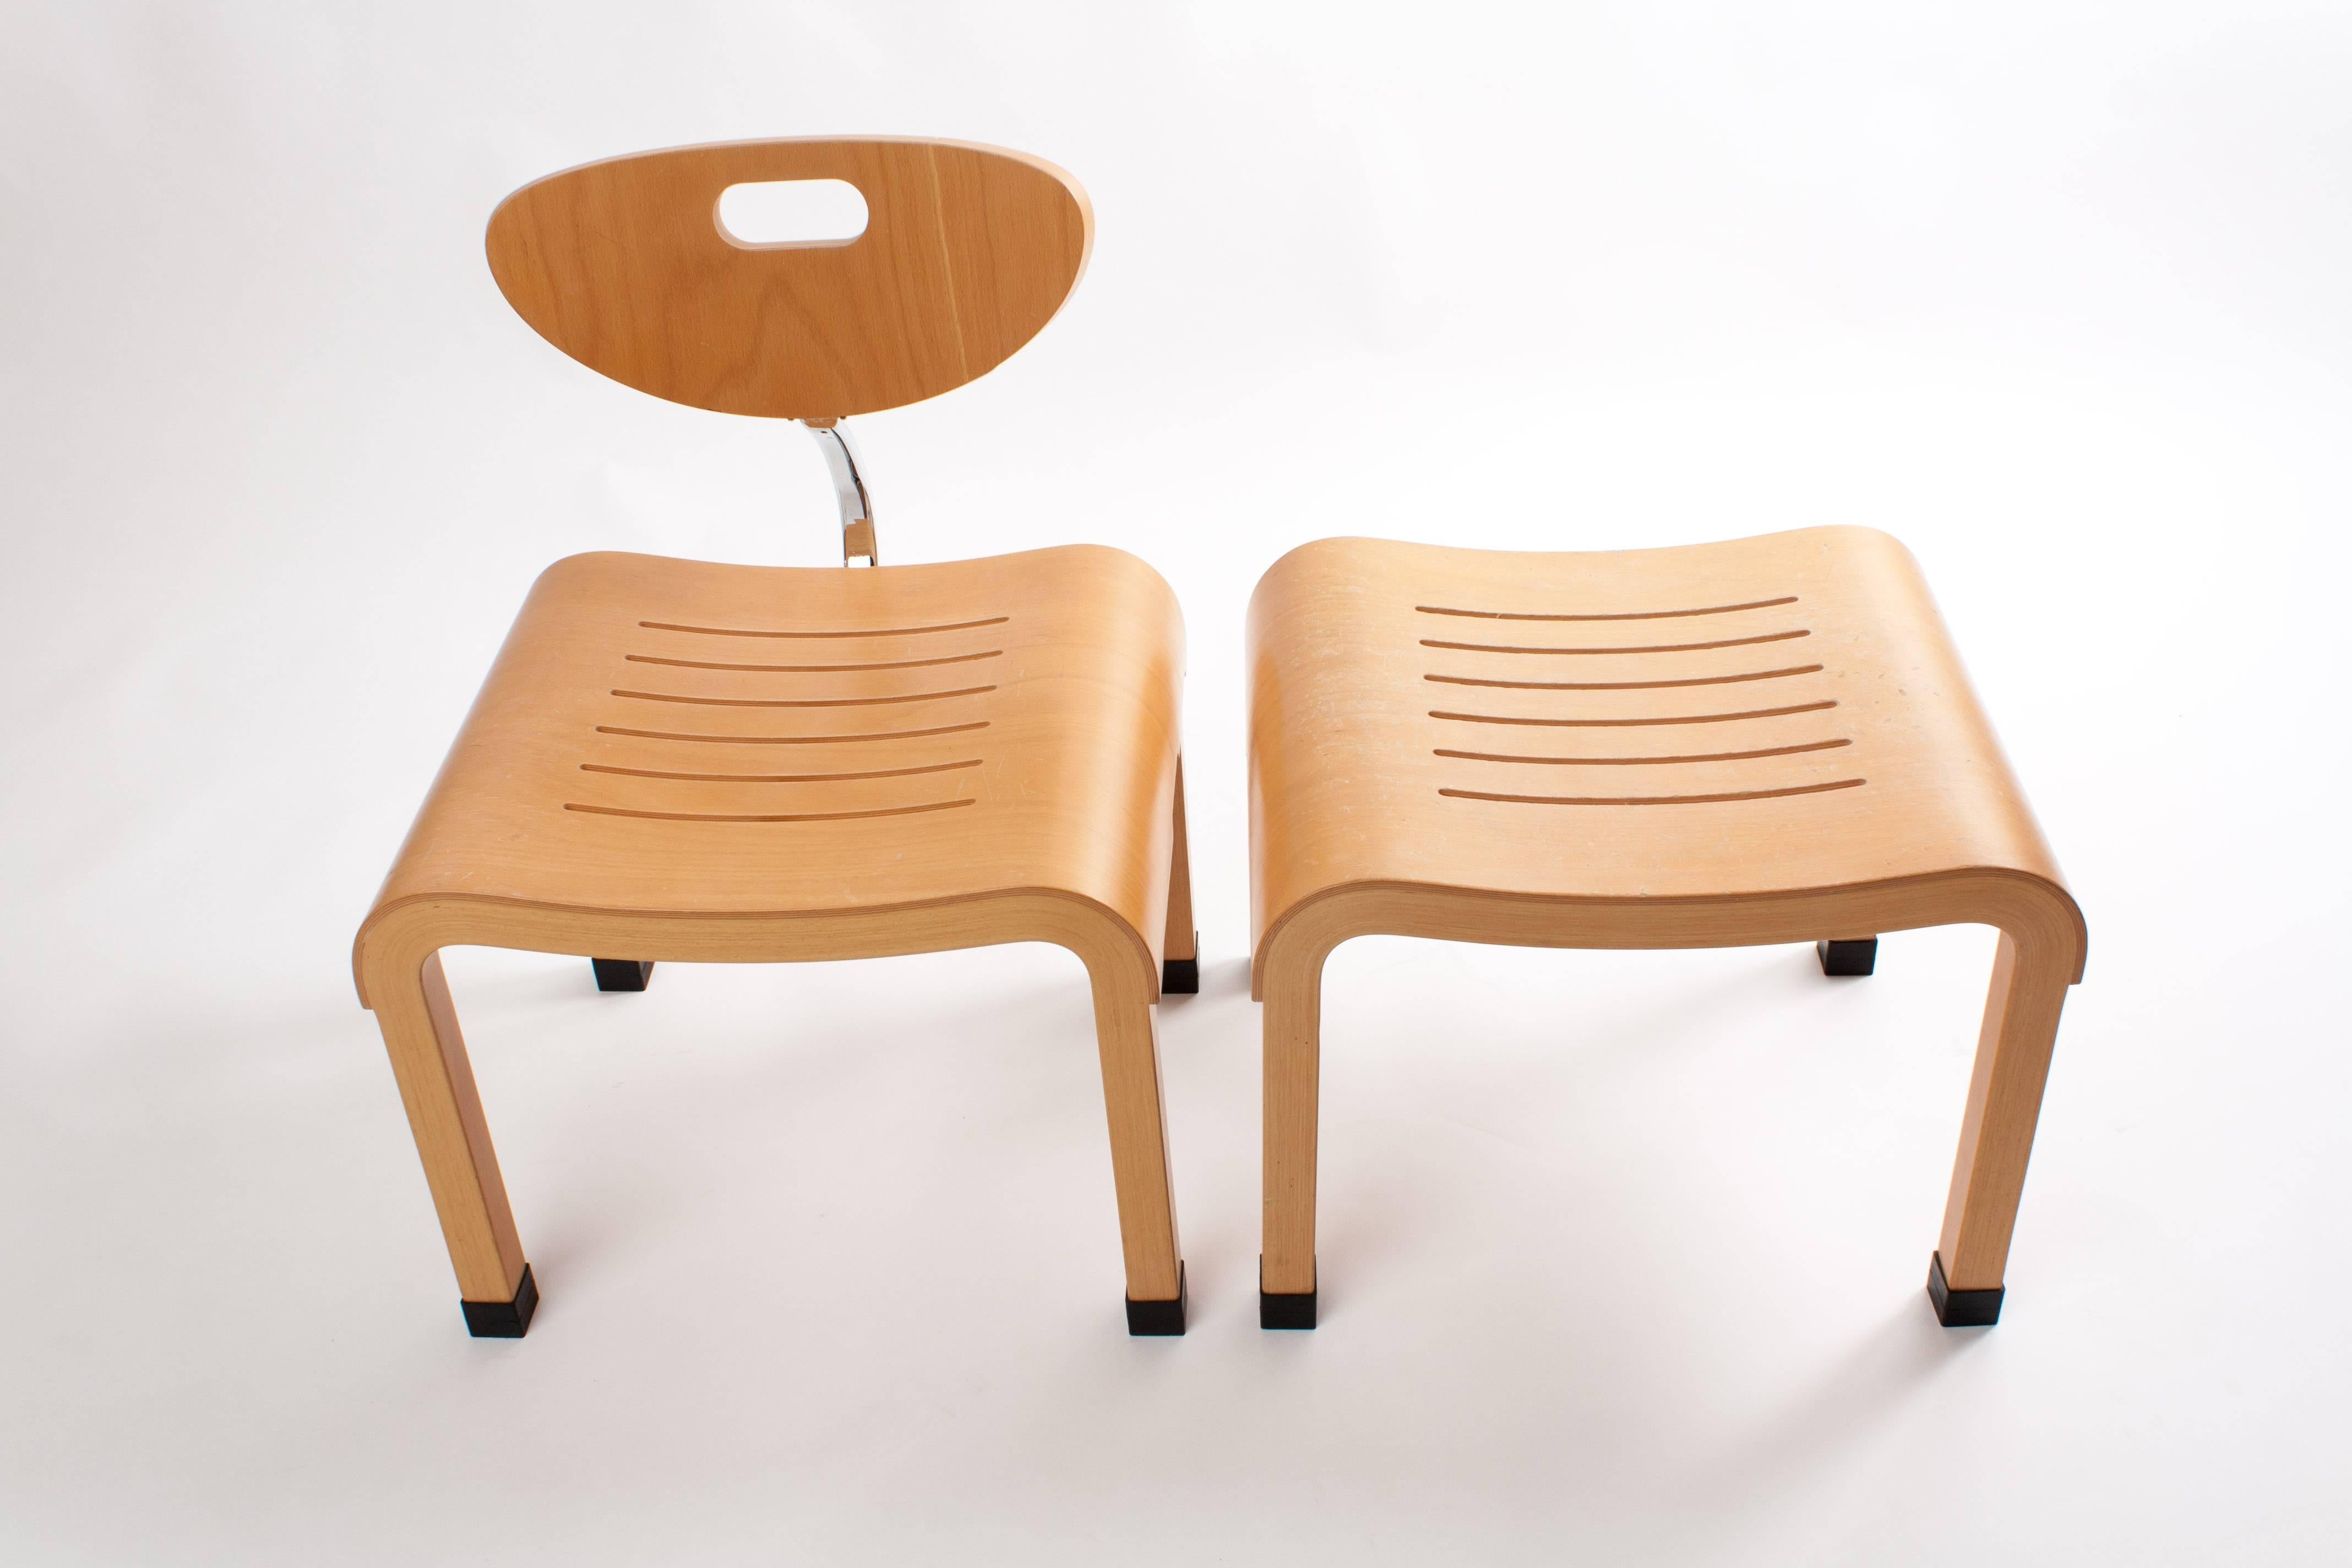 Ruud Jan Kokke. A chair and footstool of Dutch designer Ruud-Jan Kokke. The chair and footstool are made from bended wood. The chair is 79cm height, 57cm width and 55cm deep. The sitting height is 44cm. The footstool is is also 44cm height. The